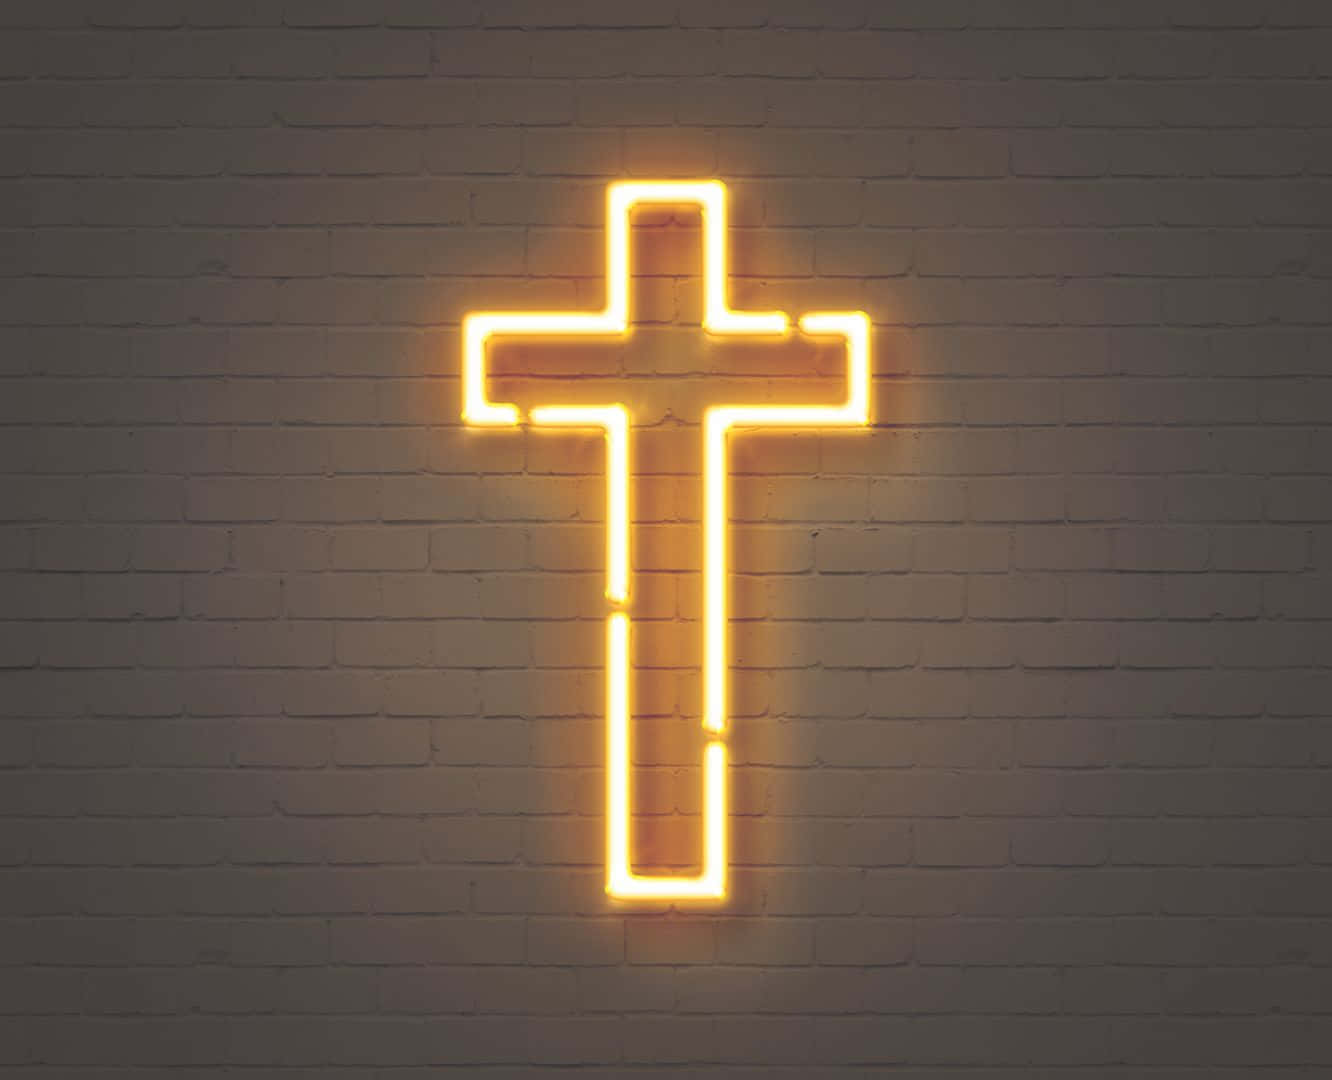 Vibrant and Colorful Abstract Cross Wallpaper